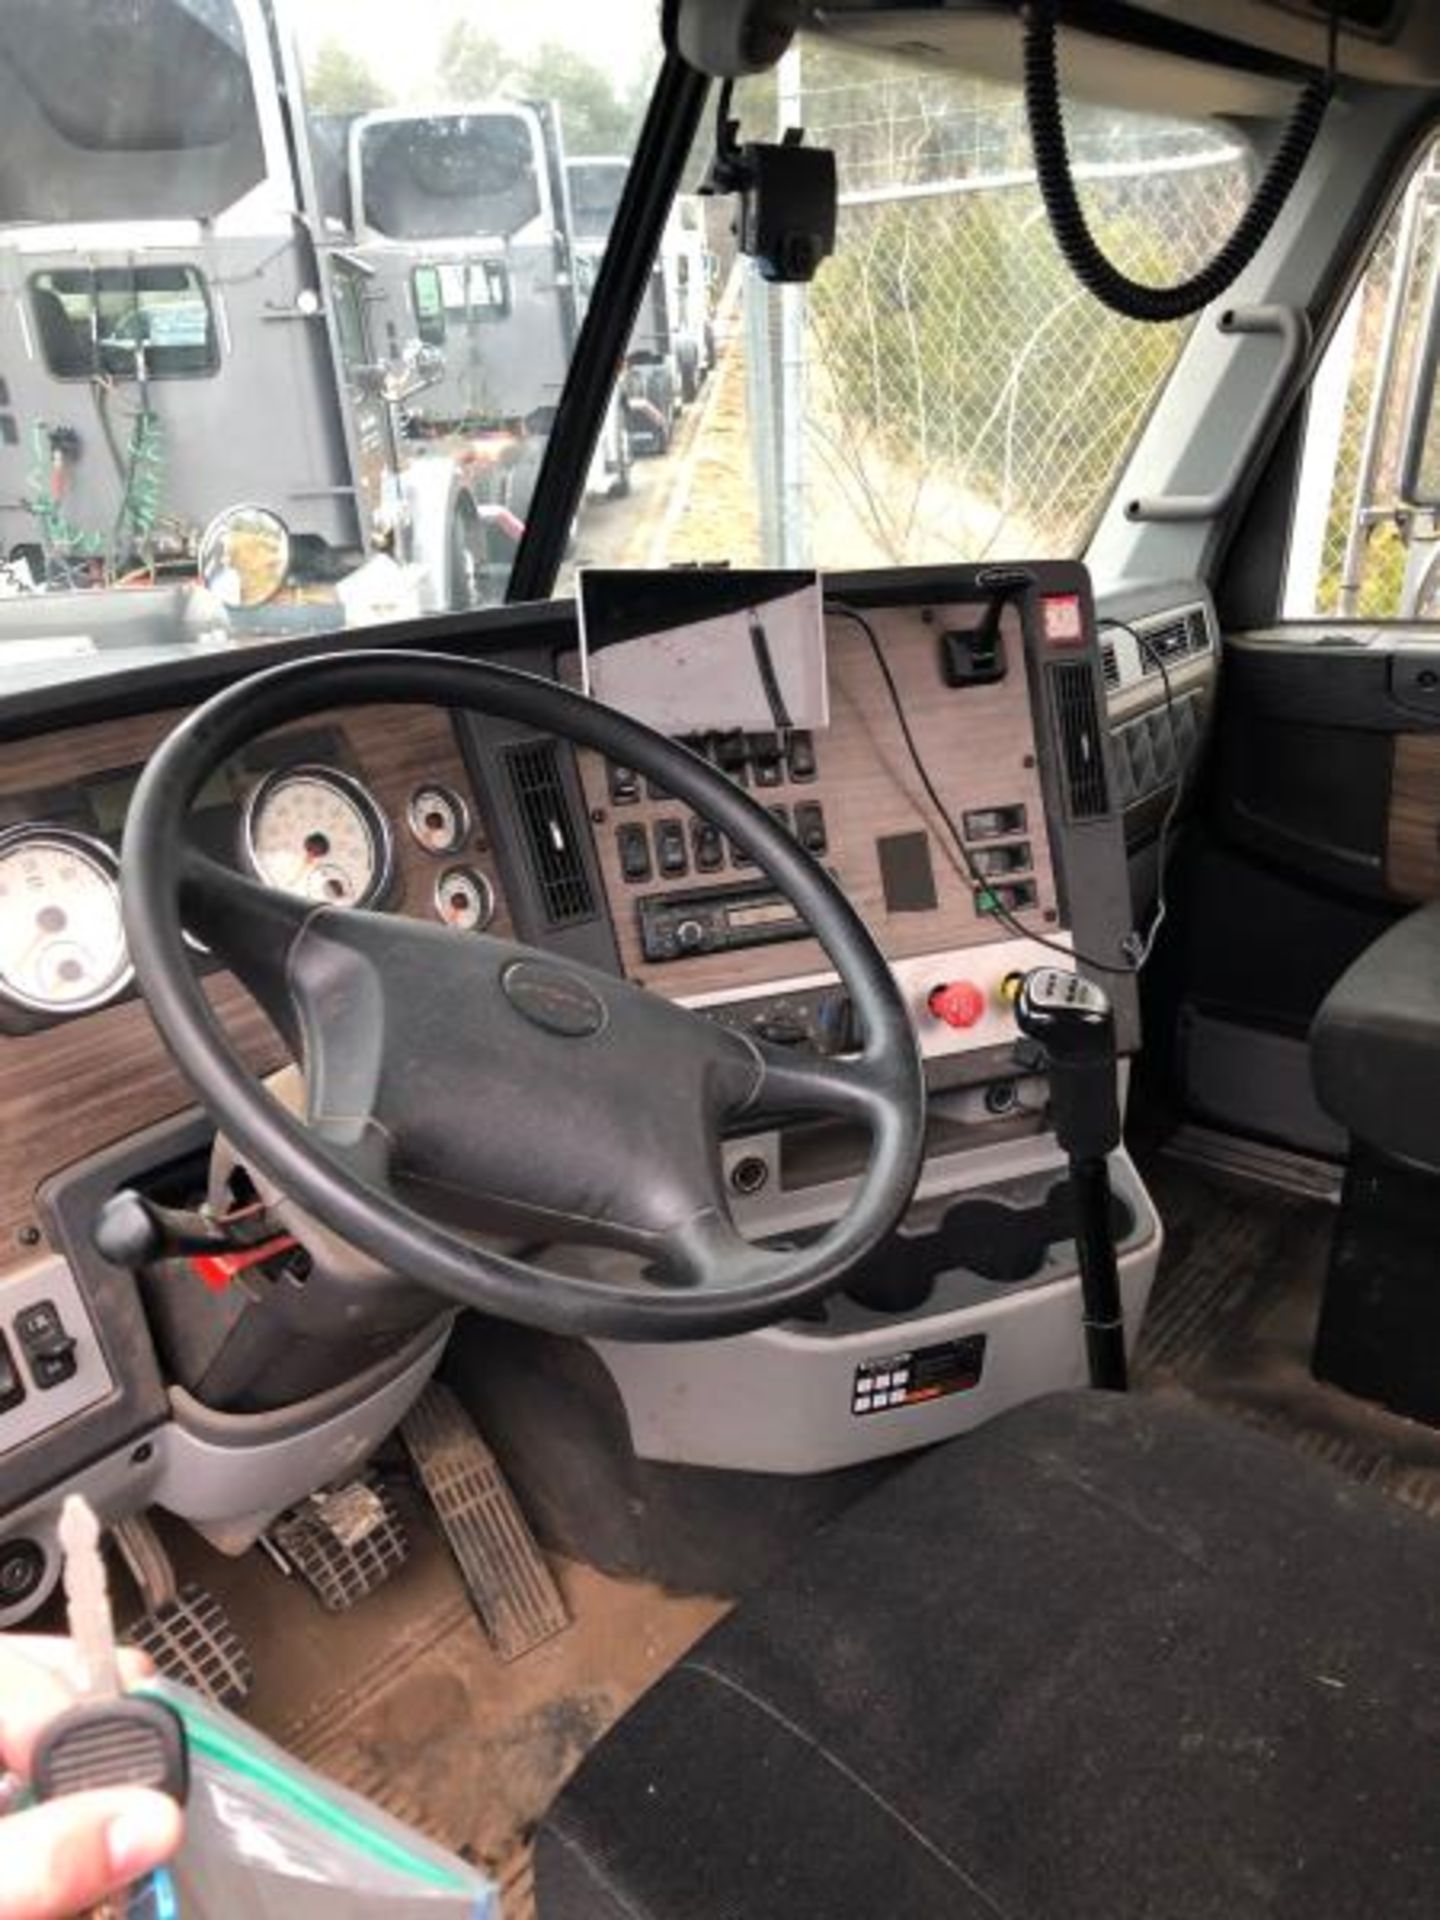 2017 Freightliner 122SD, 166,322 Miles - Image 2 of 29